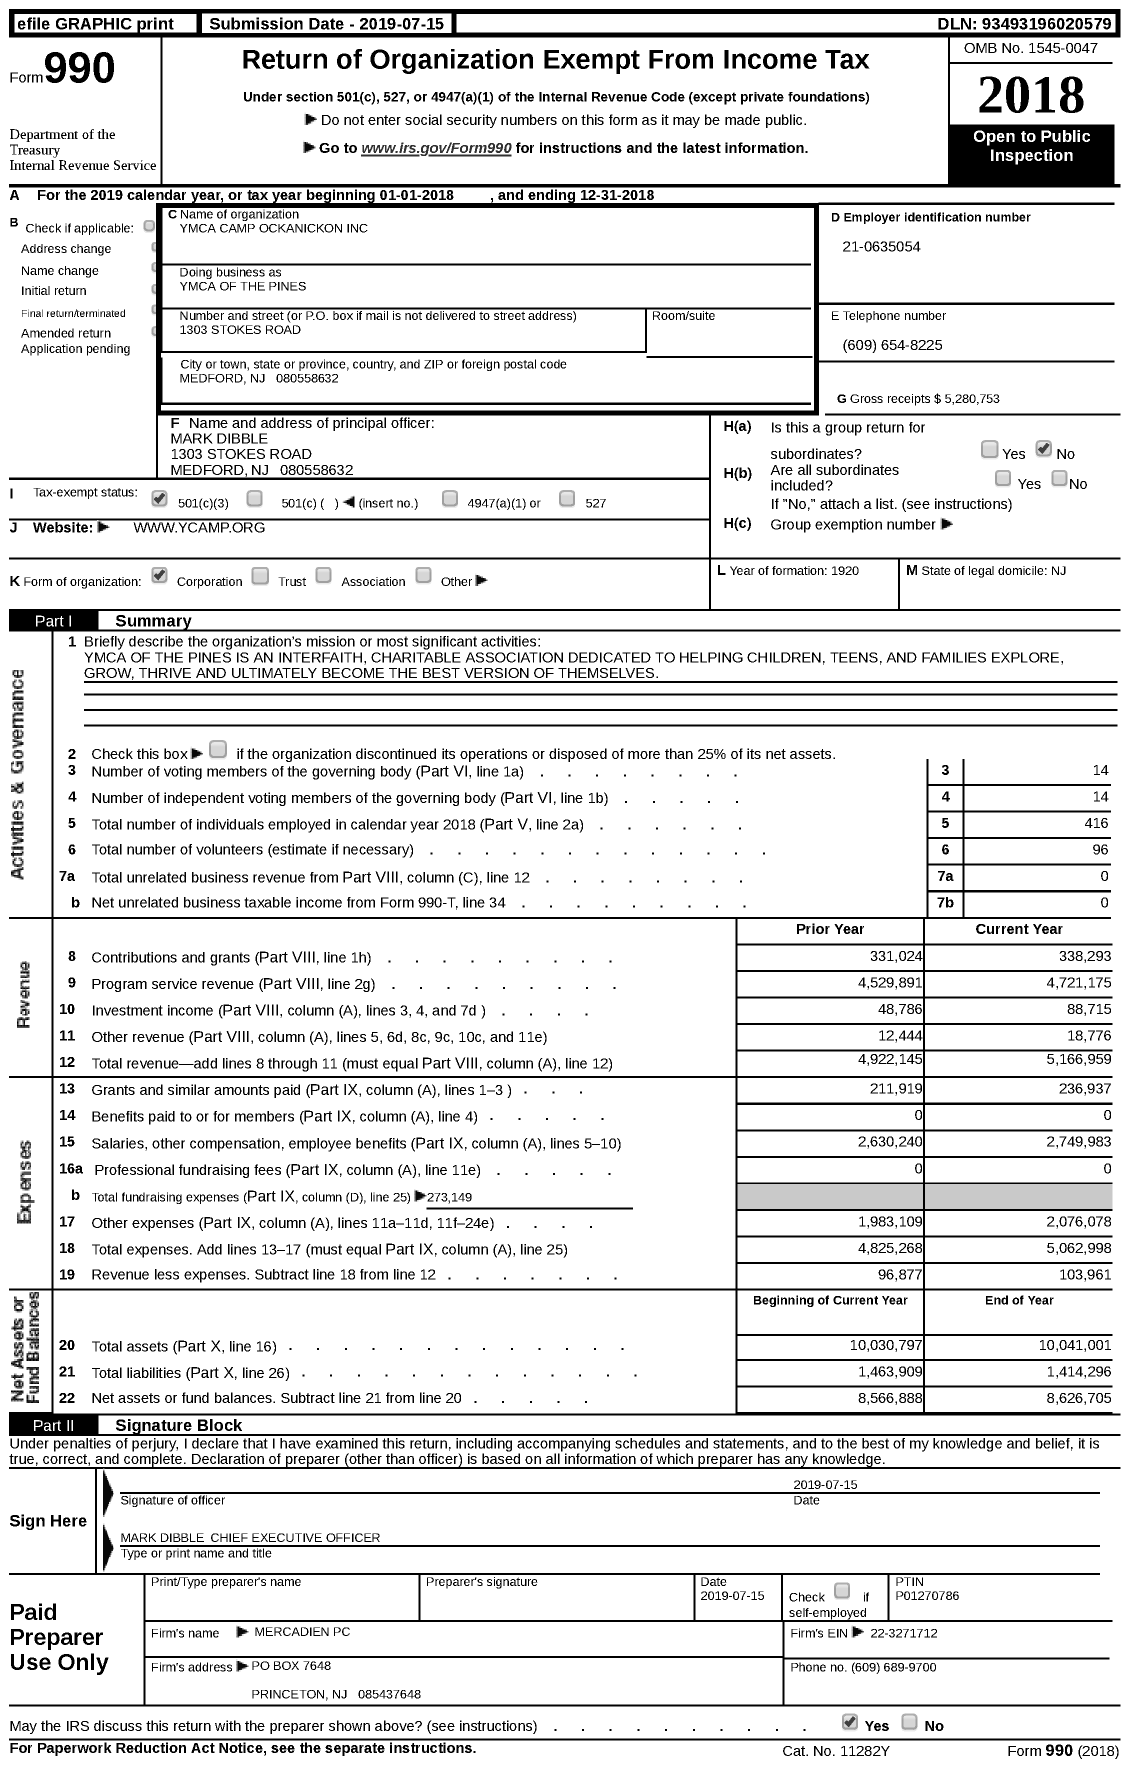 Image of first page of 2018 Form 990 for YMCA of the Pines